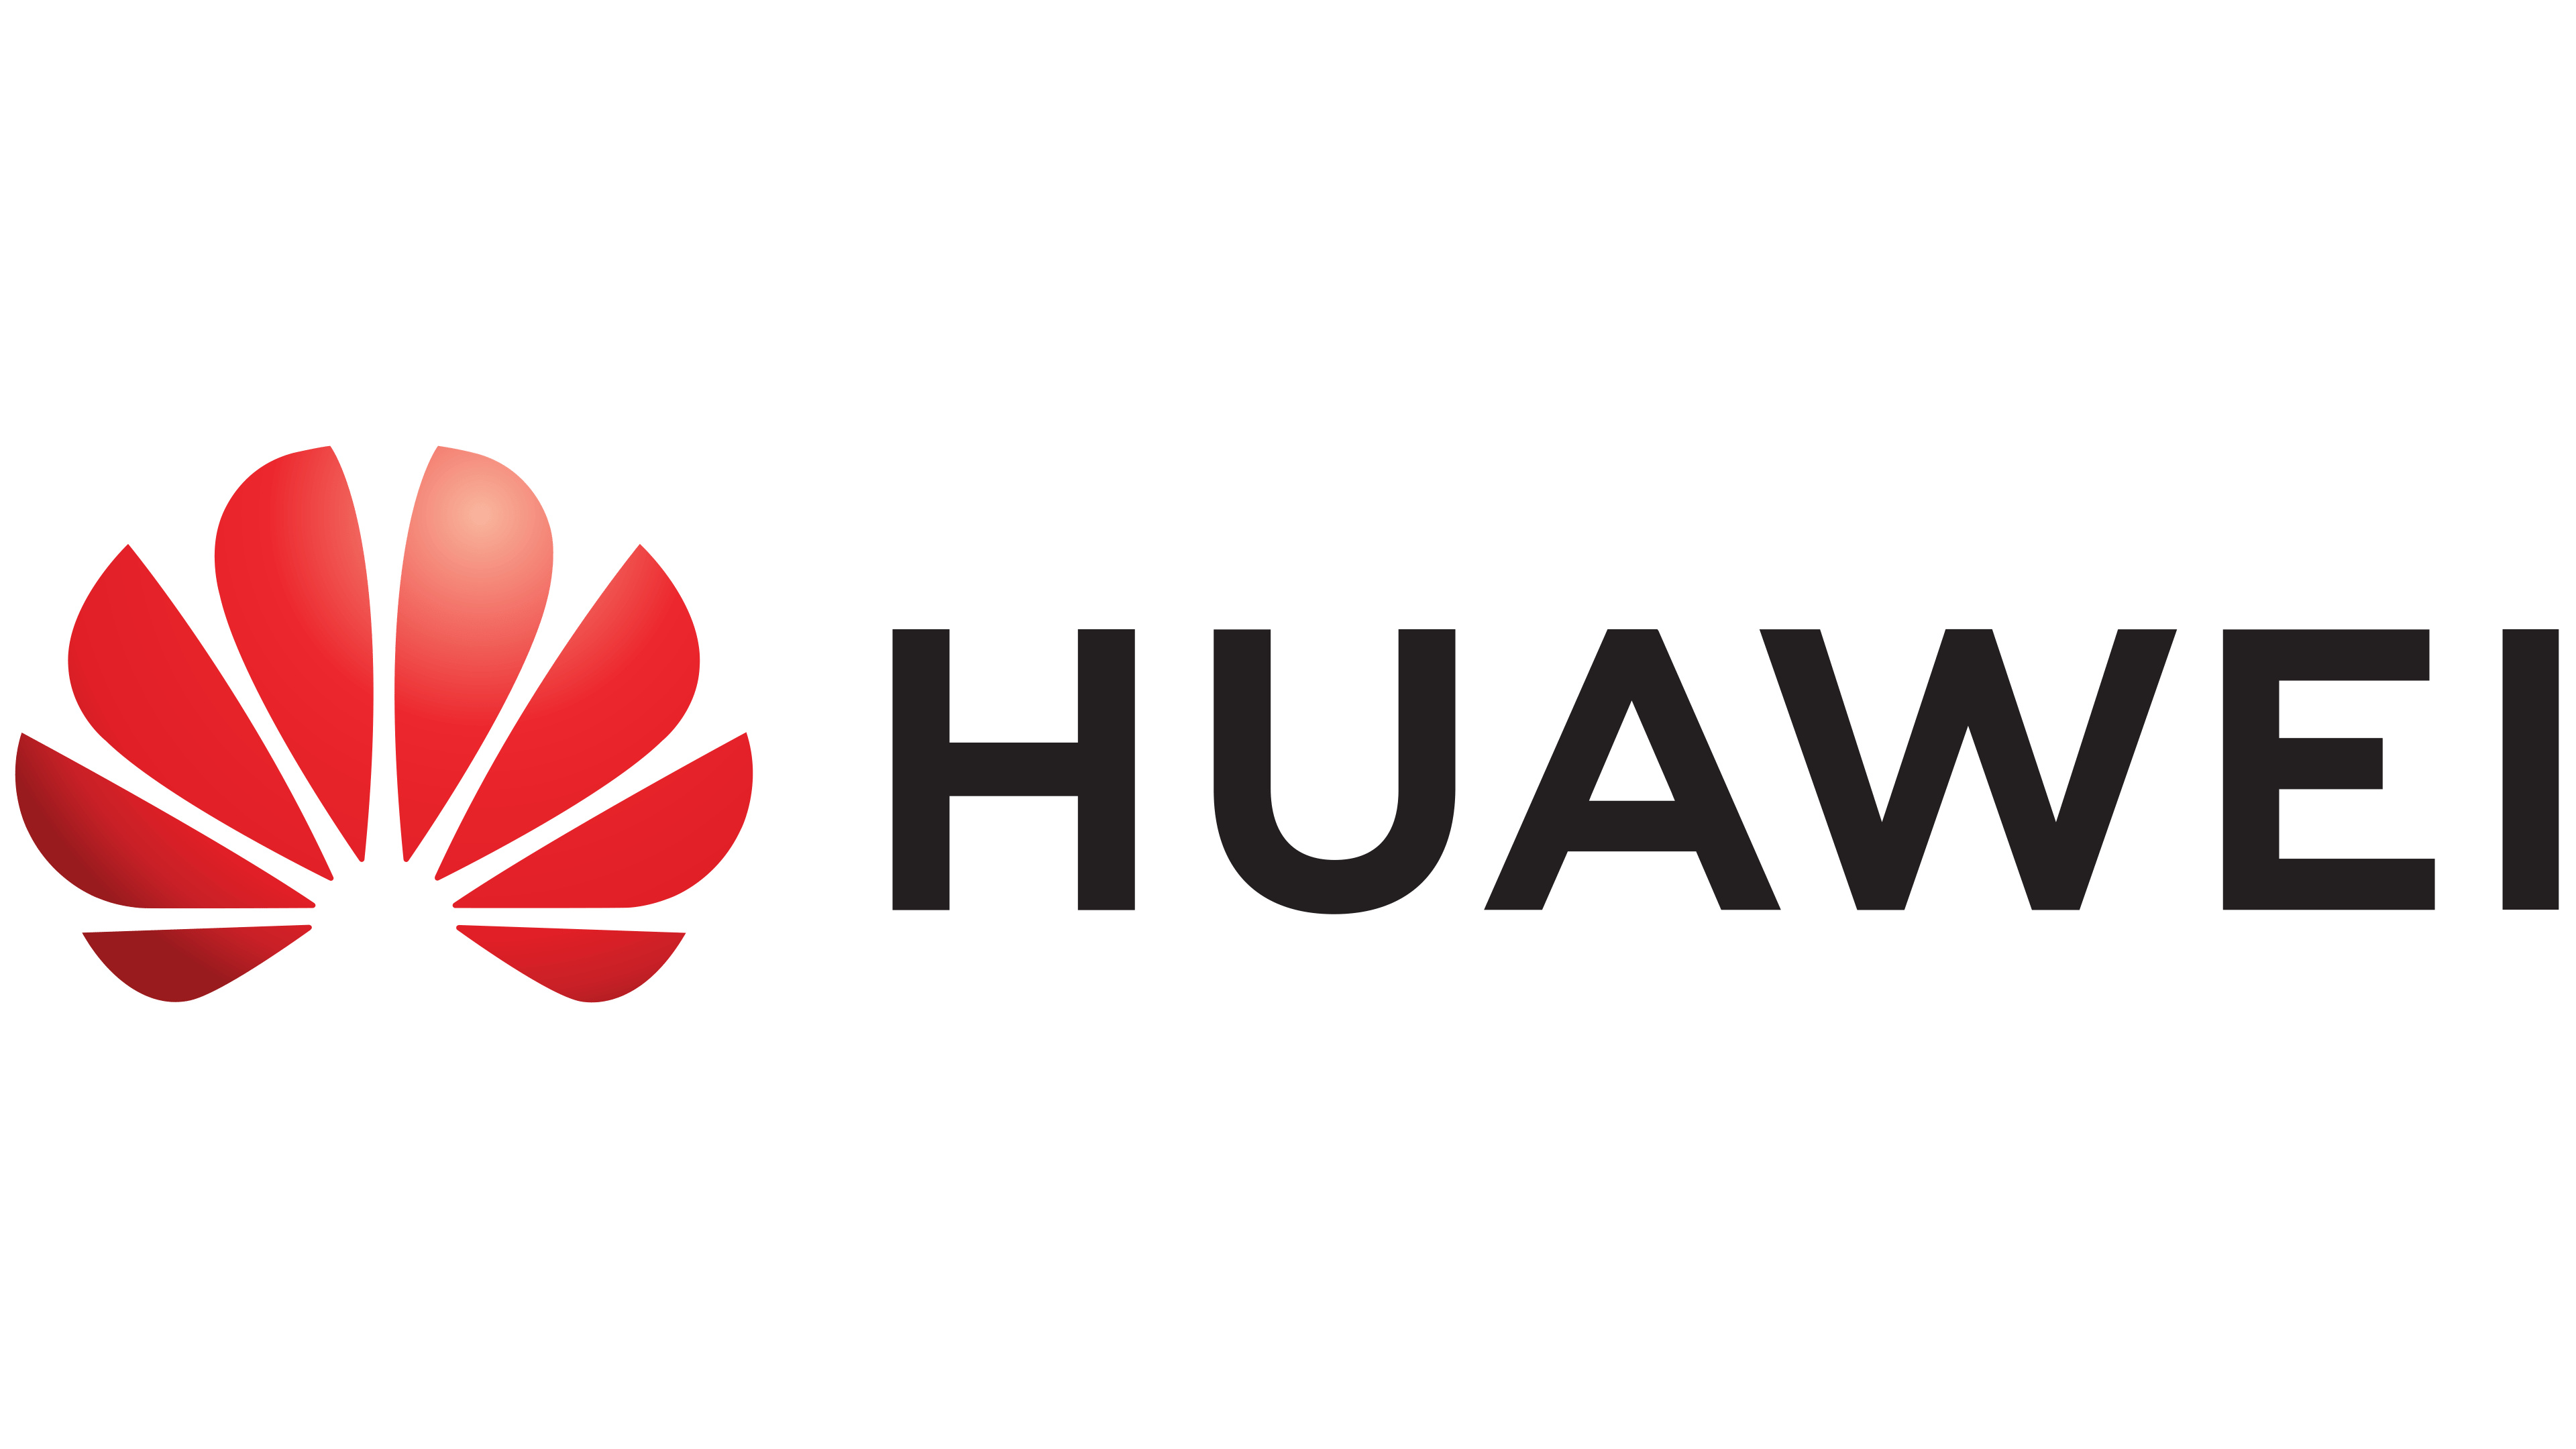 Huawei Logo, symbol, meaning, history, PNG 3840x2160